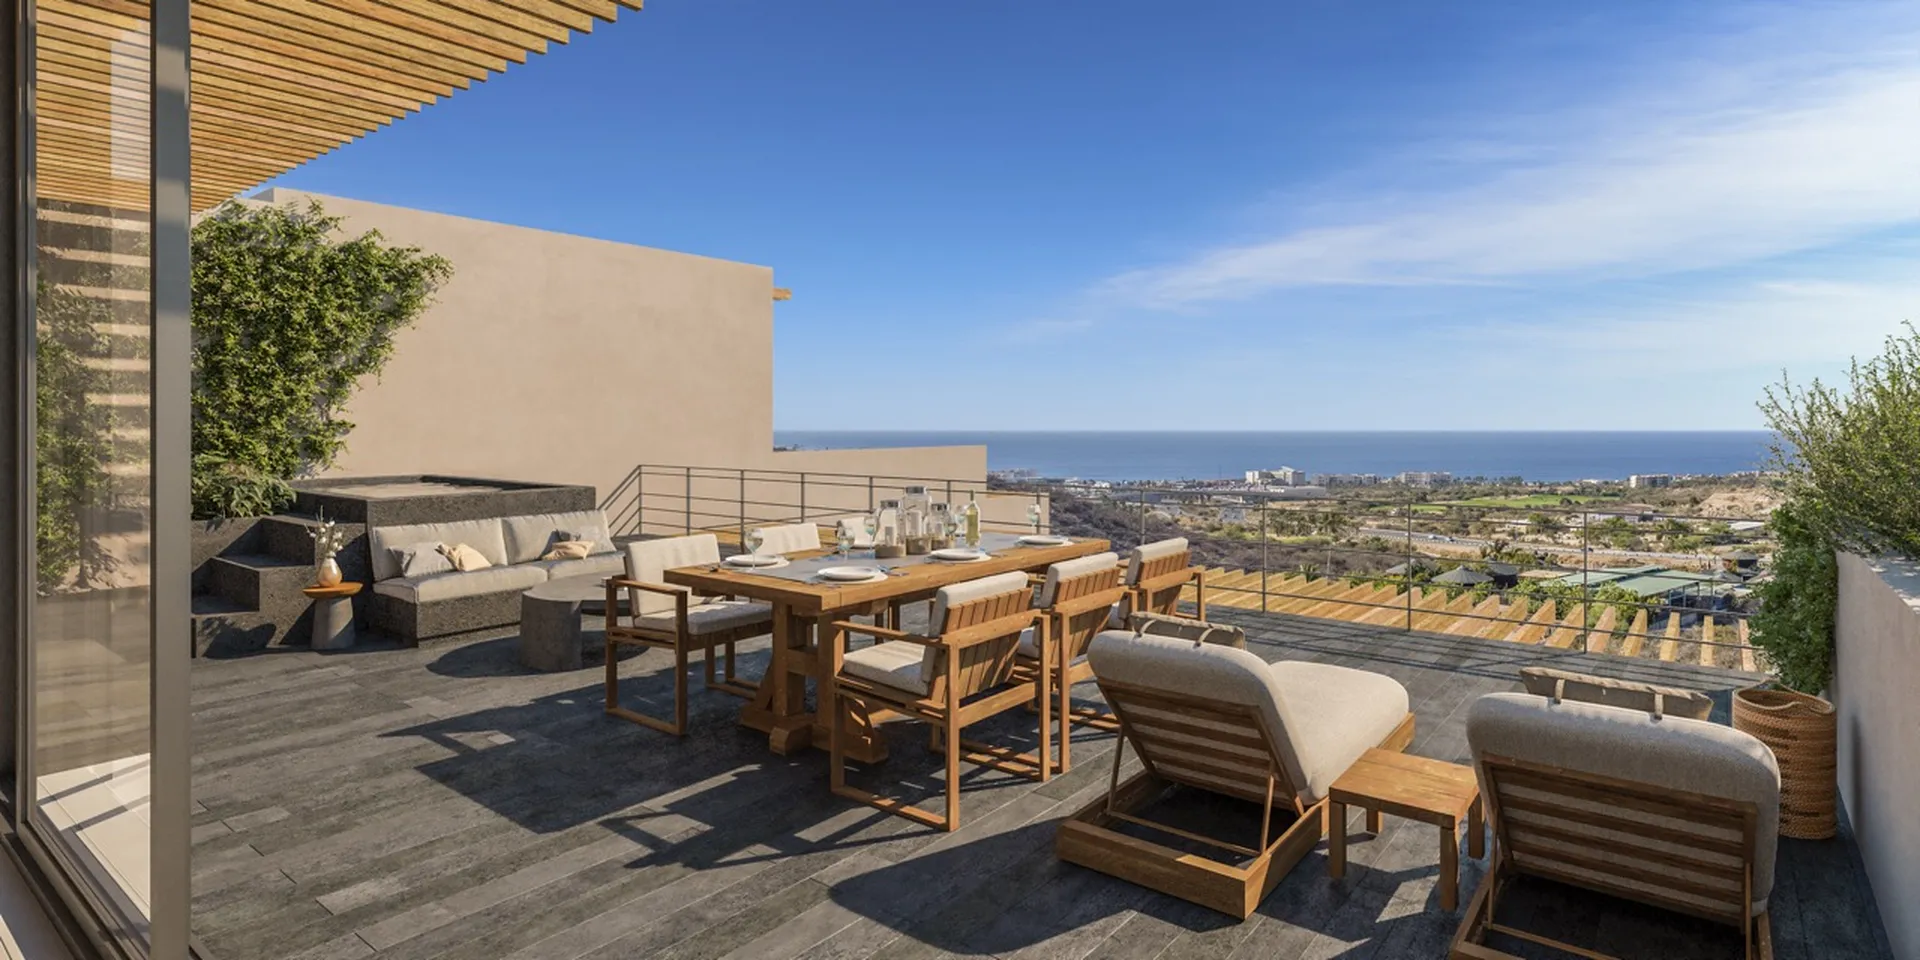 Discover the luxurious Zarzal community, featuring 84 exquisite residences located in the picturesque San Jose Del Cabo.